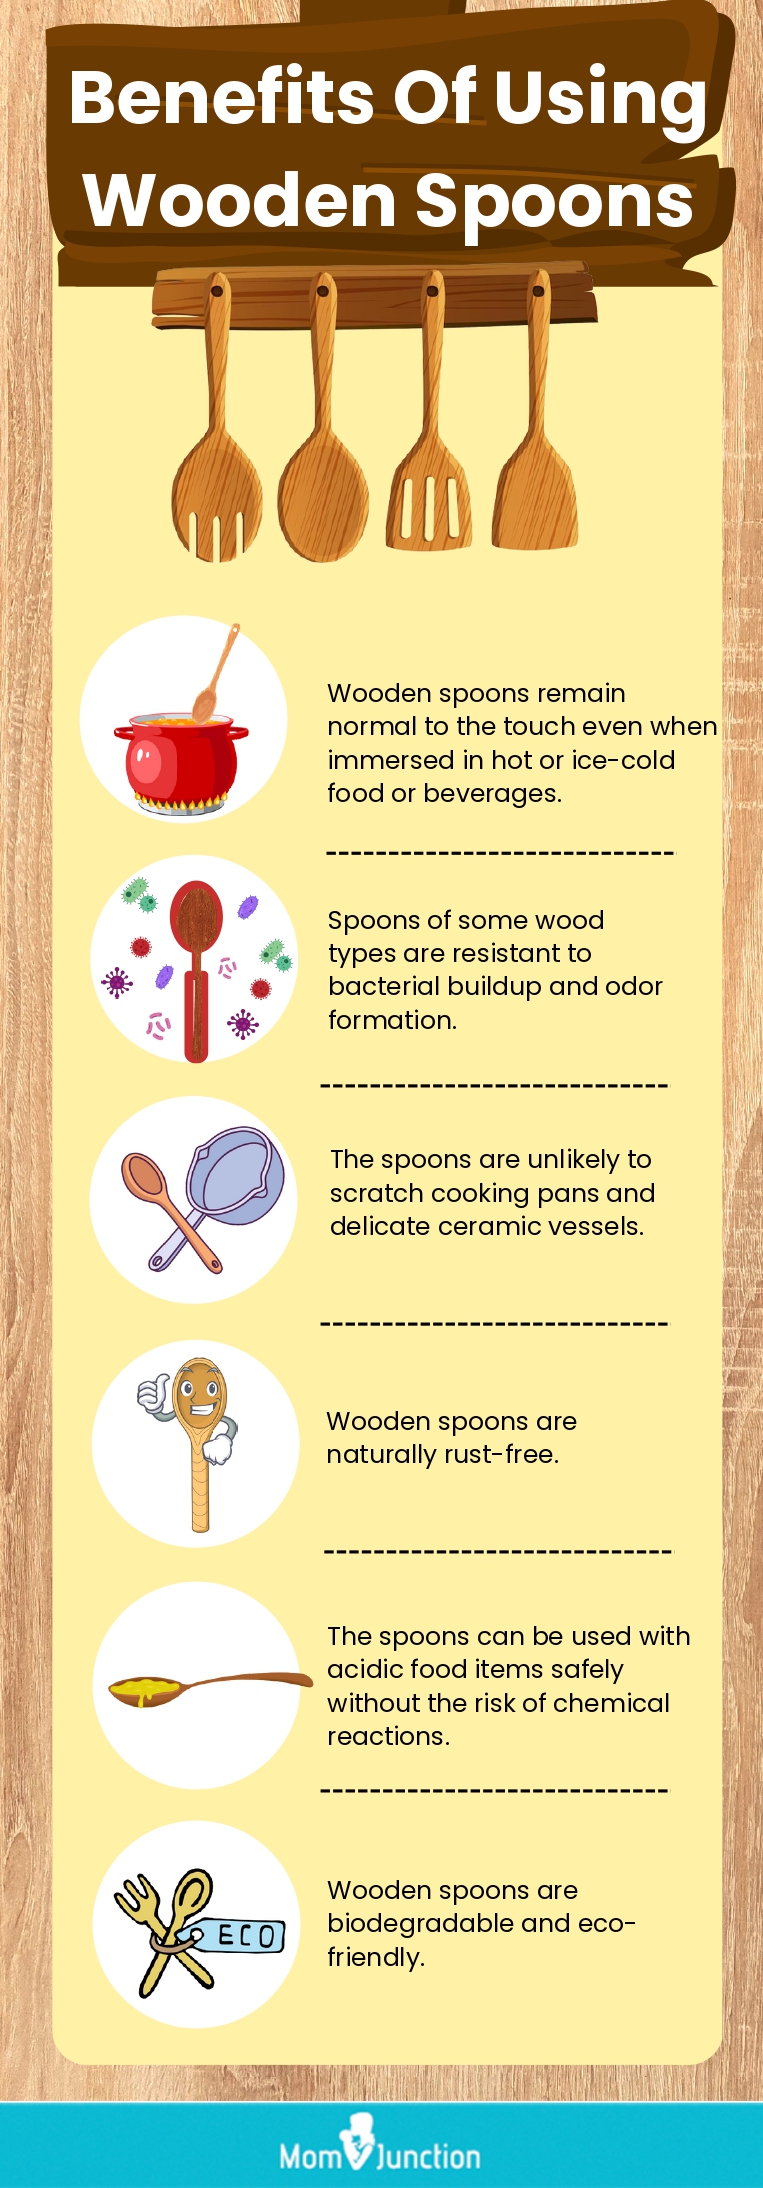 Benefits Of Using Wooden Spoons (infographic)